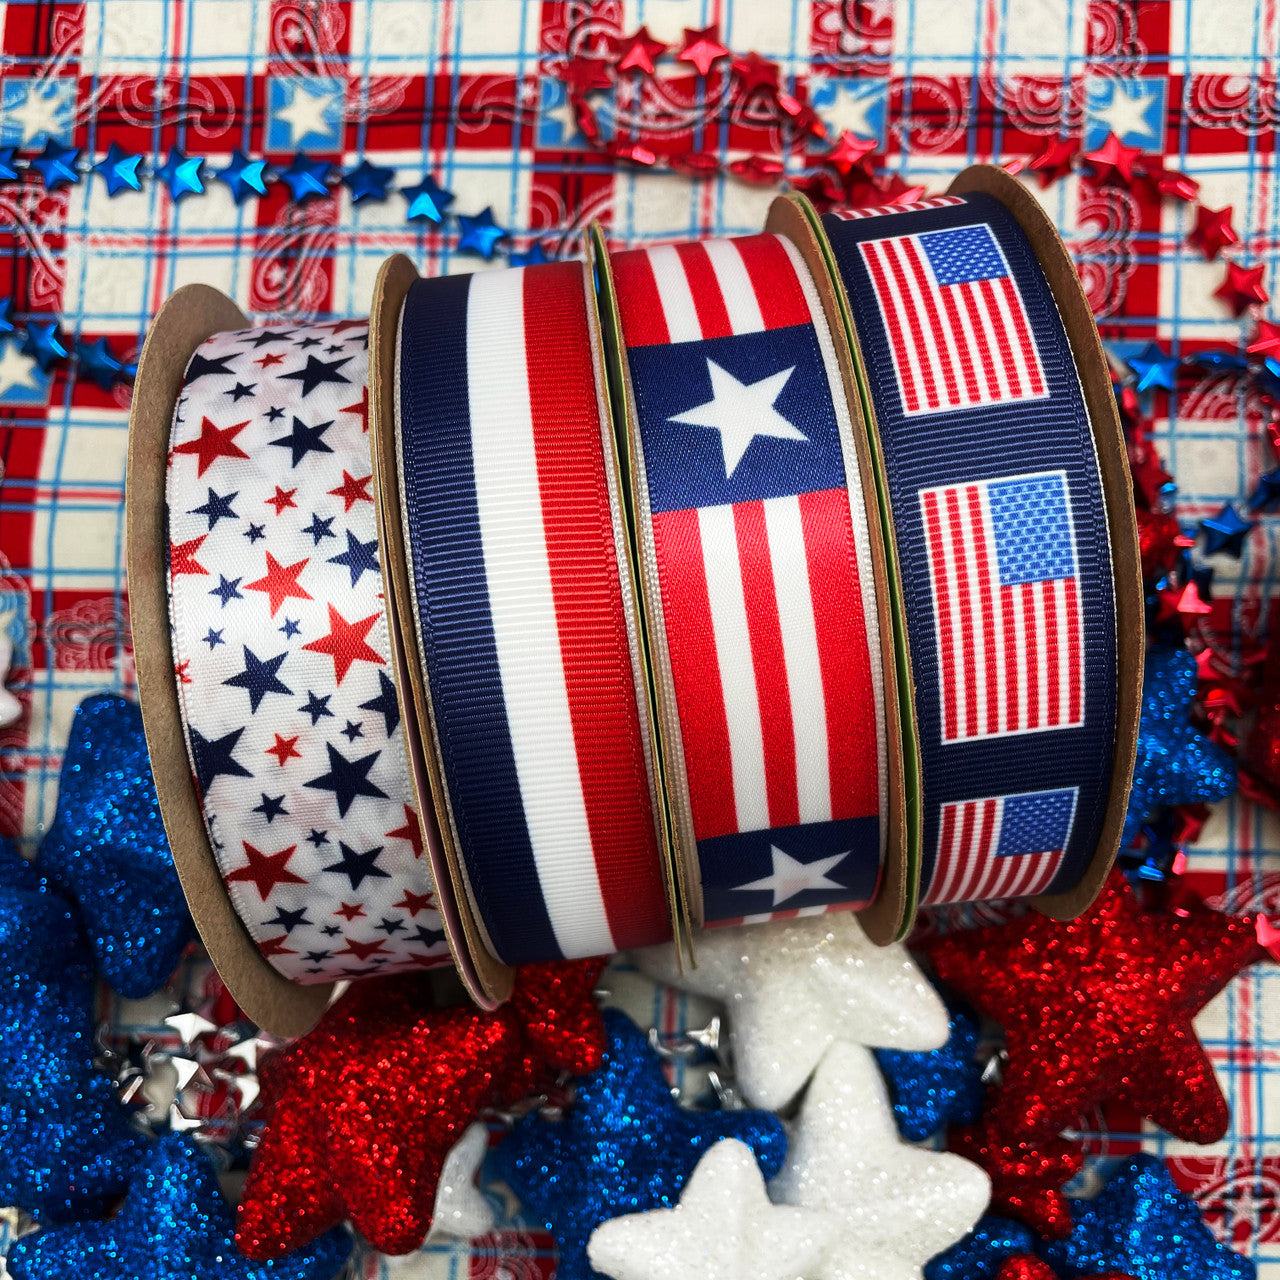 Mix and match all our red, white and blue ribbon for your America celebrations! Perfect for 4th of July, Memorial Day, Labor Day and Veterans Day!